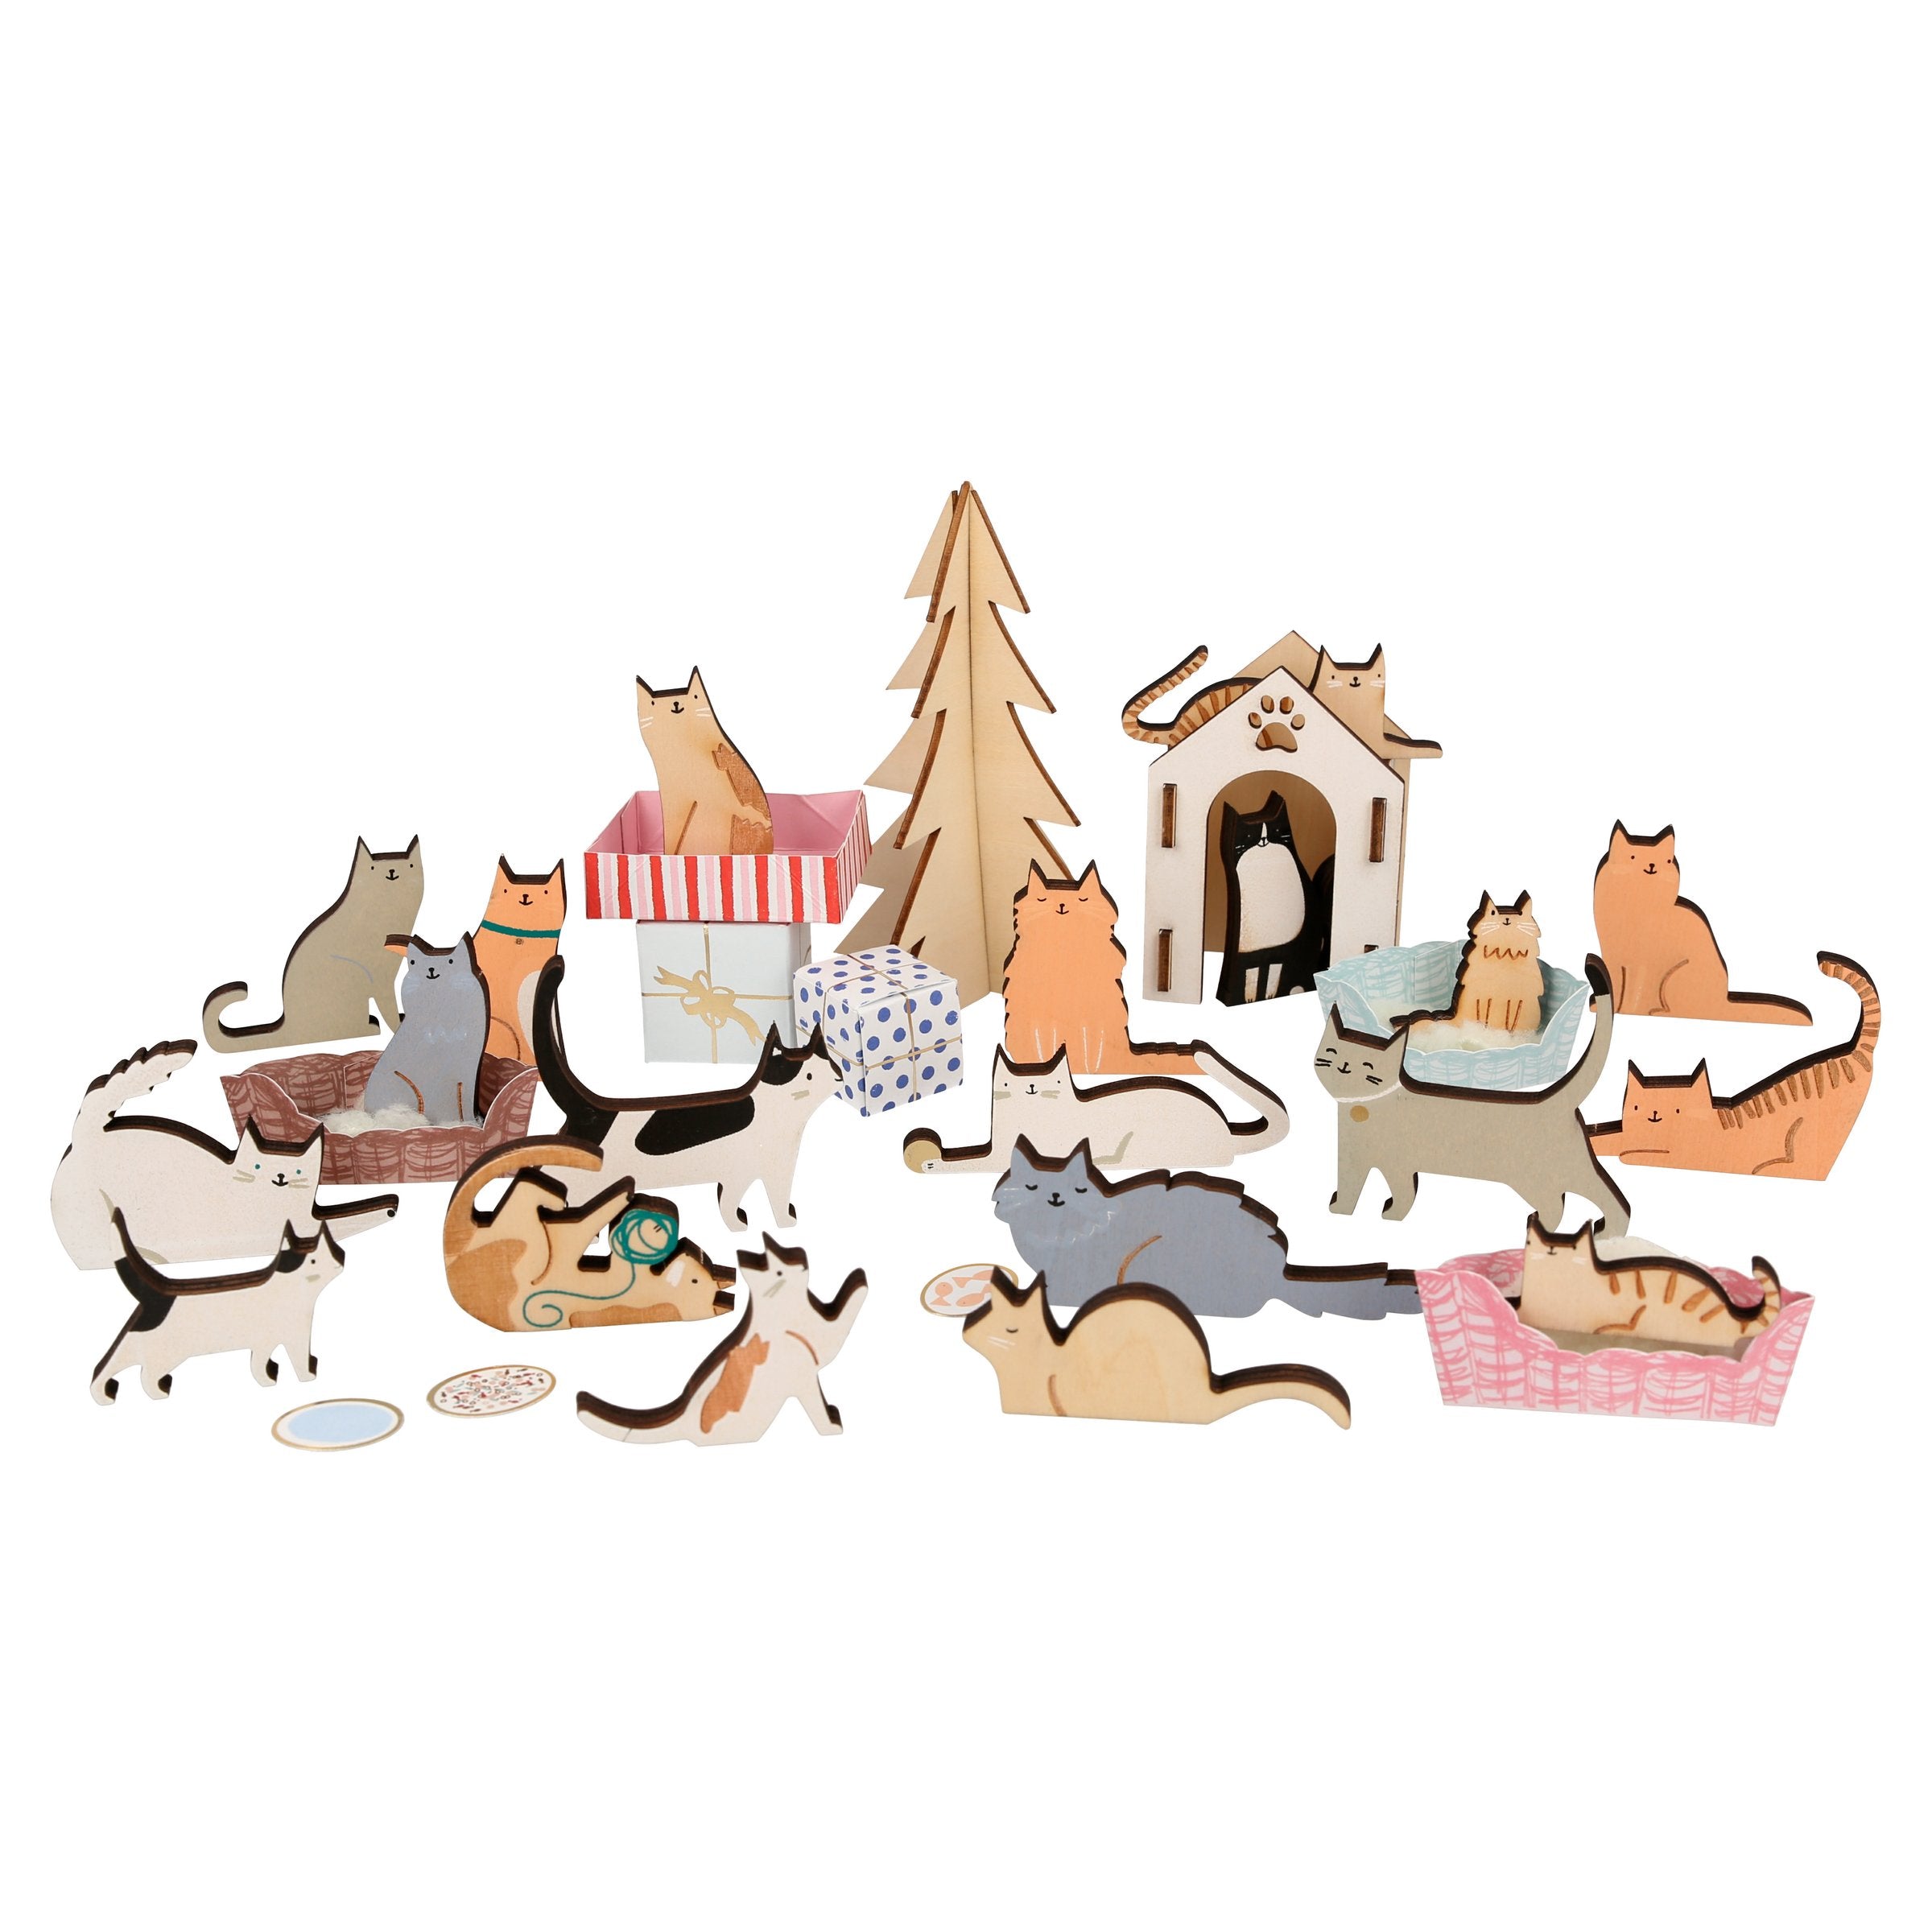 This wonderful kids advent calendar is full of kids cat toys, crafted from wood.